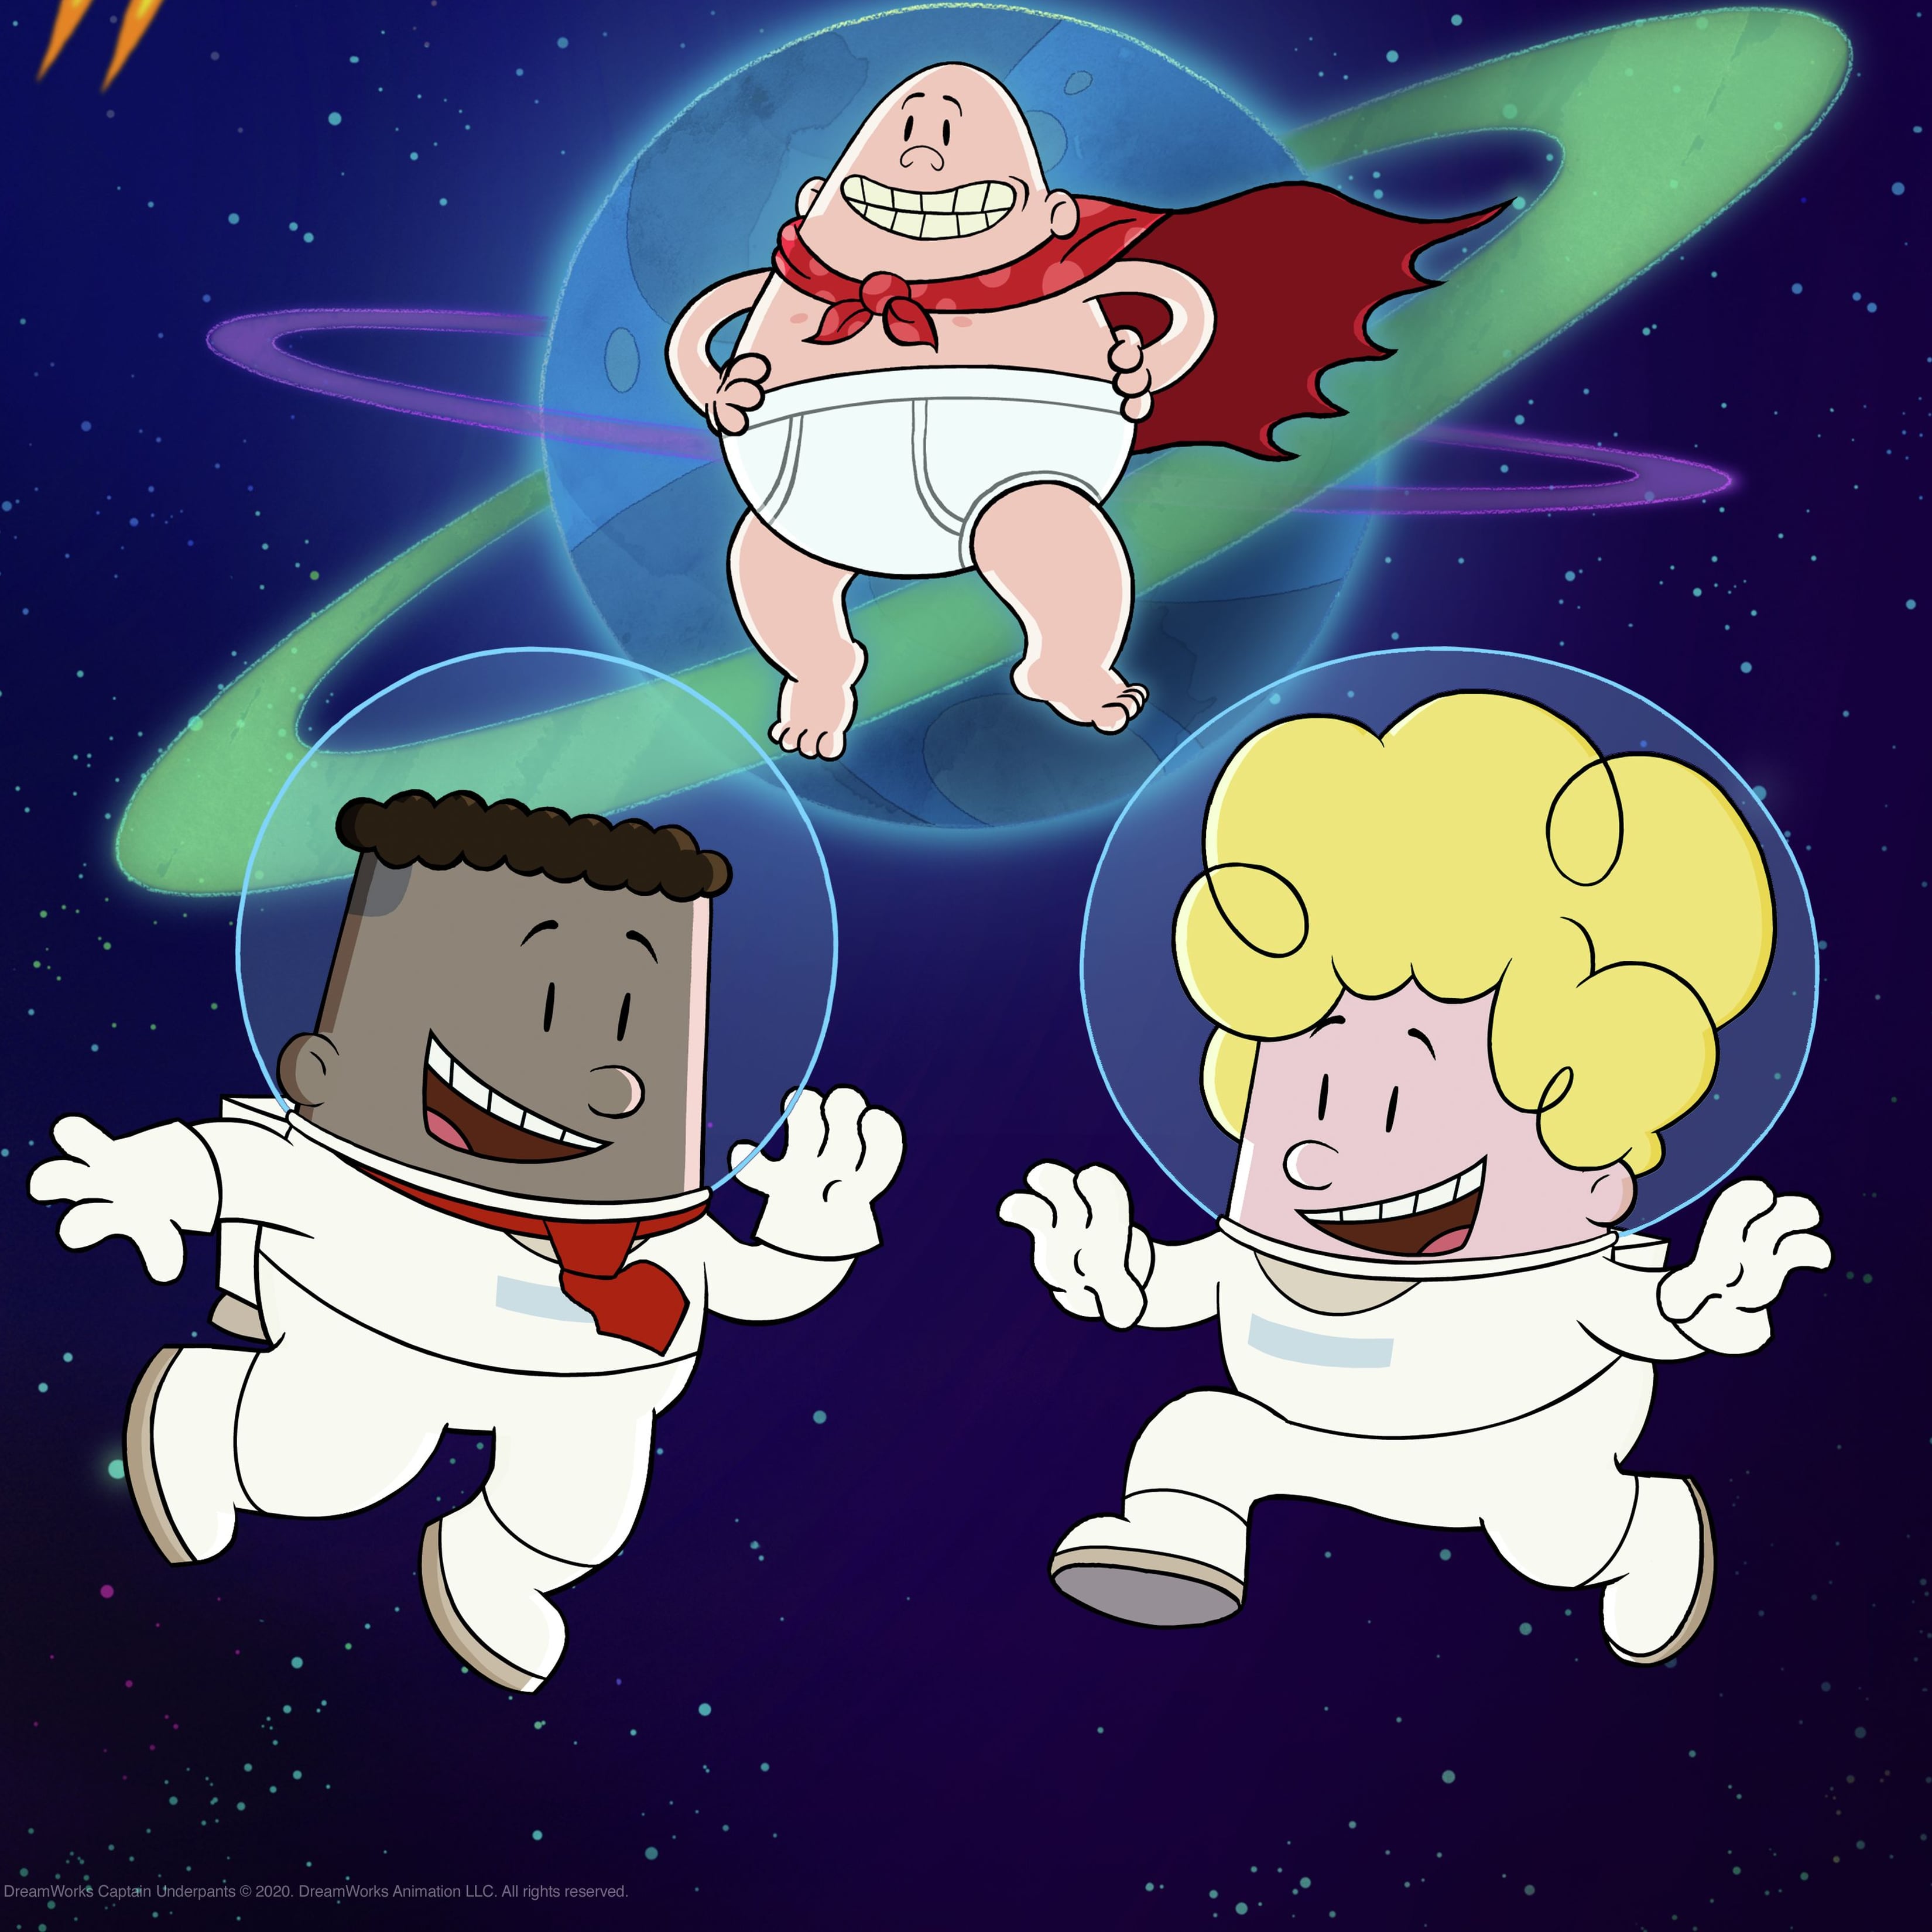 Netflix Captain Underpants in Space Trailer and Photos